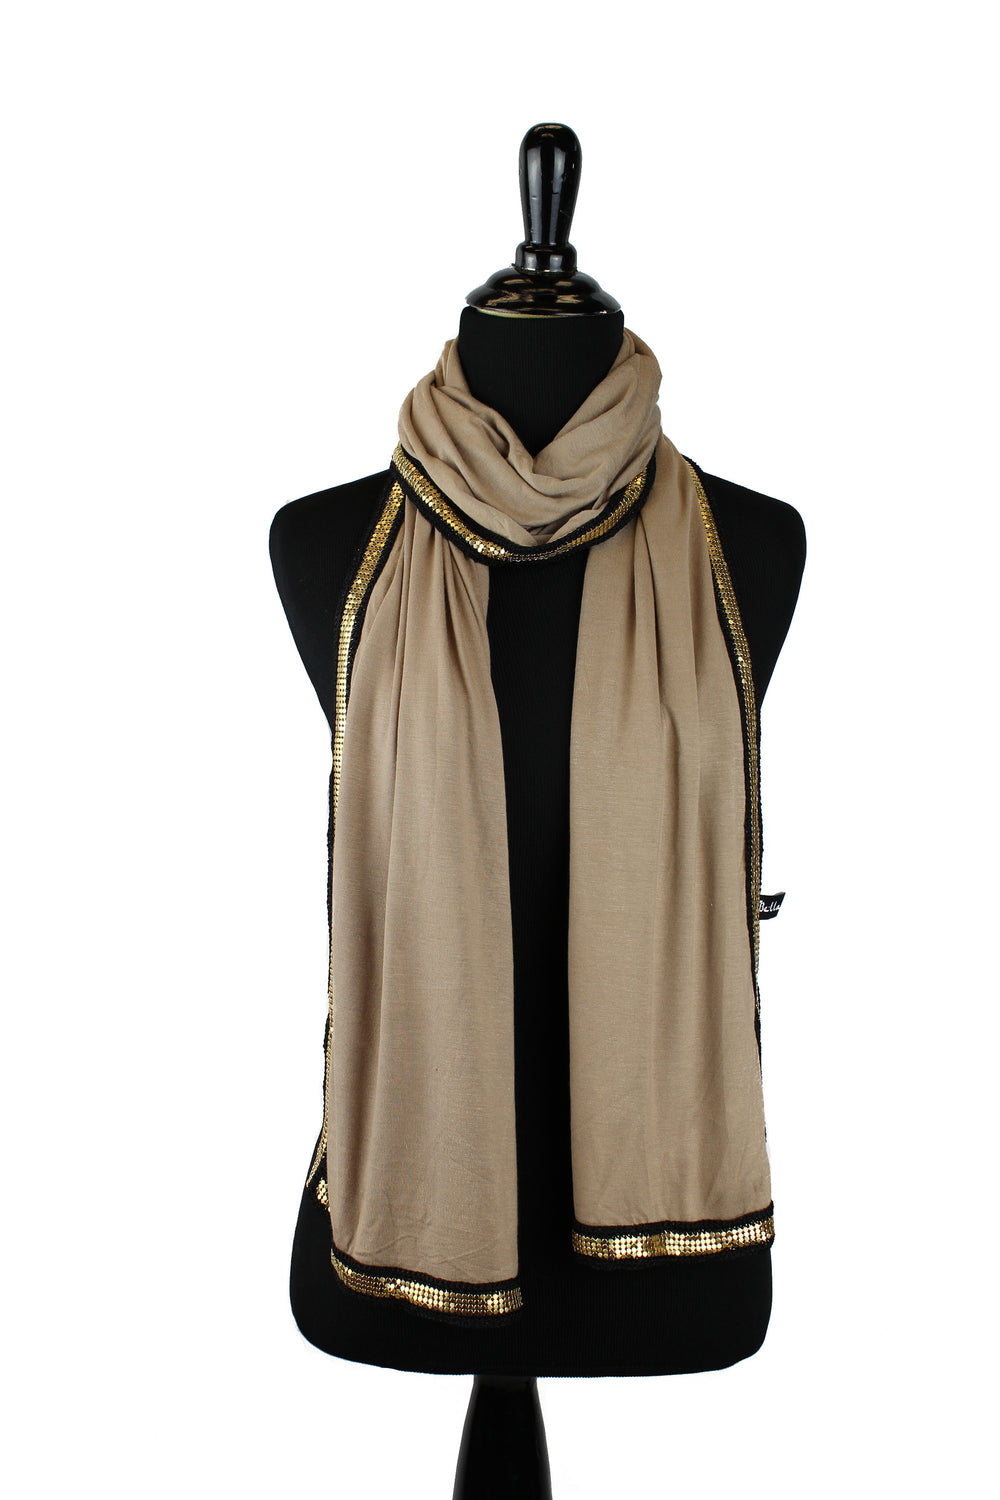 taupe jersey hijab embellished with a gold trim along the edges